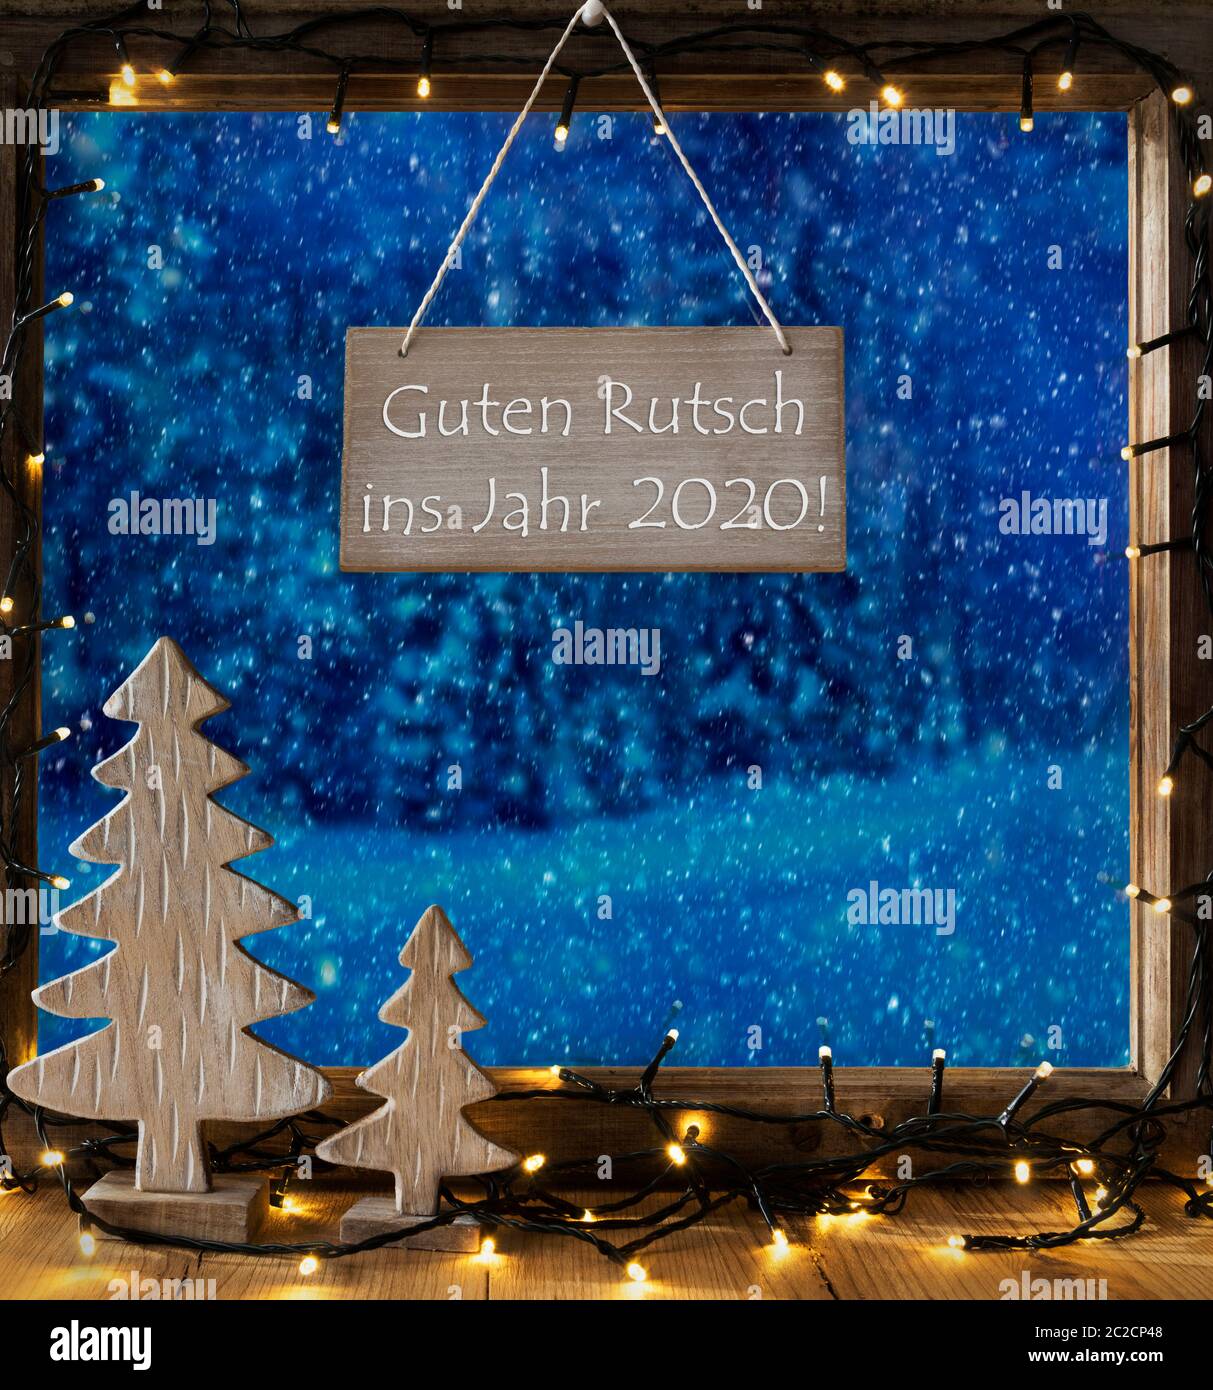 Sign With German Text Guten Rutsch Ins Jahr 2020 Means Happy New Year 2018. Window Frame With Winter Landscape With Snow. View To Snowy Trees Outside Stock Photo